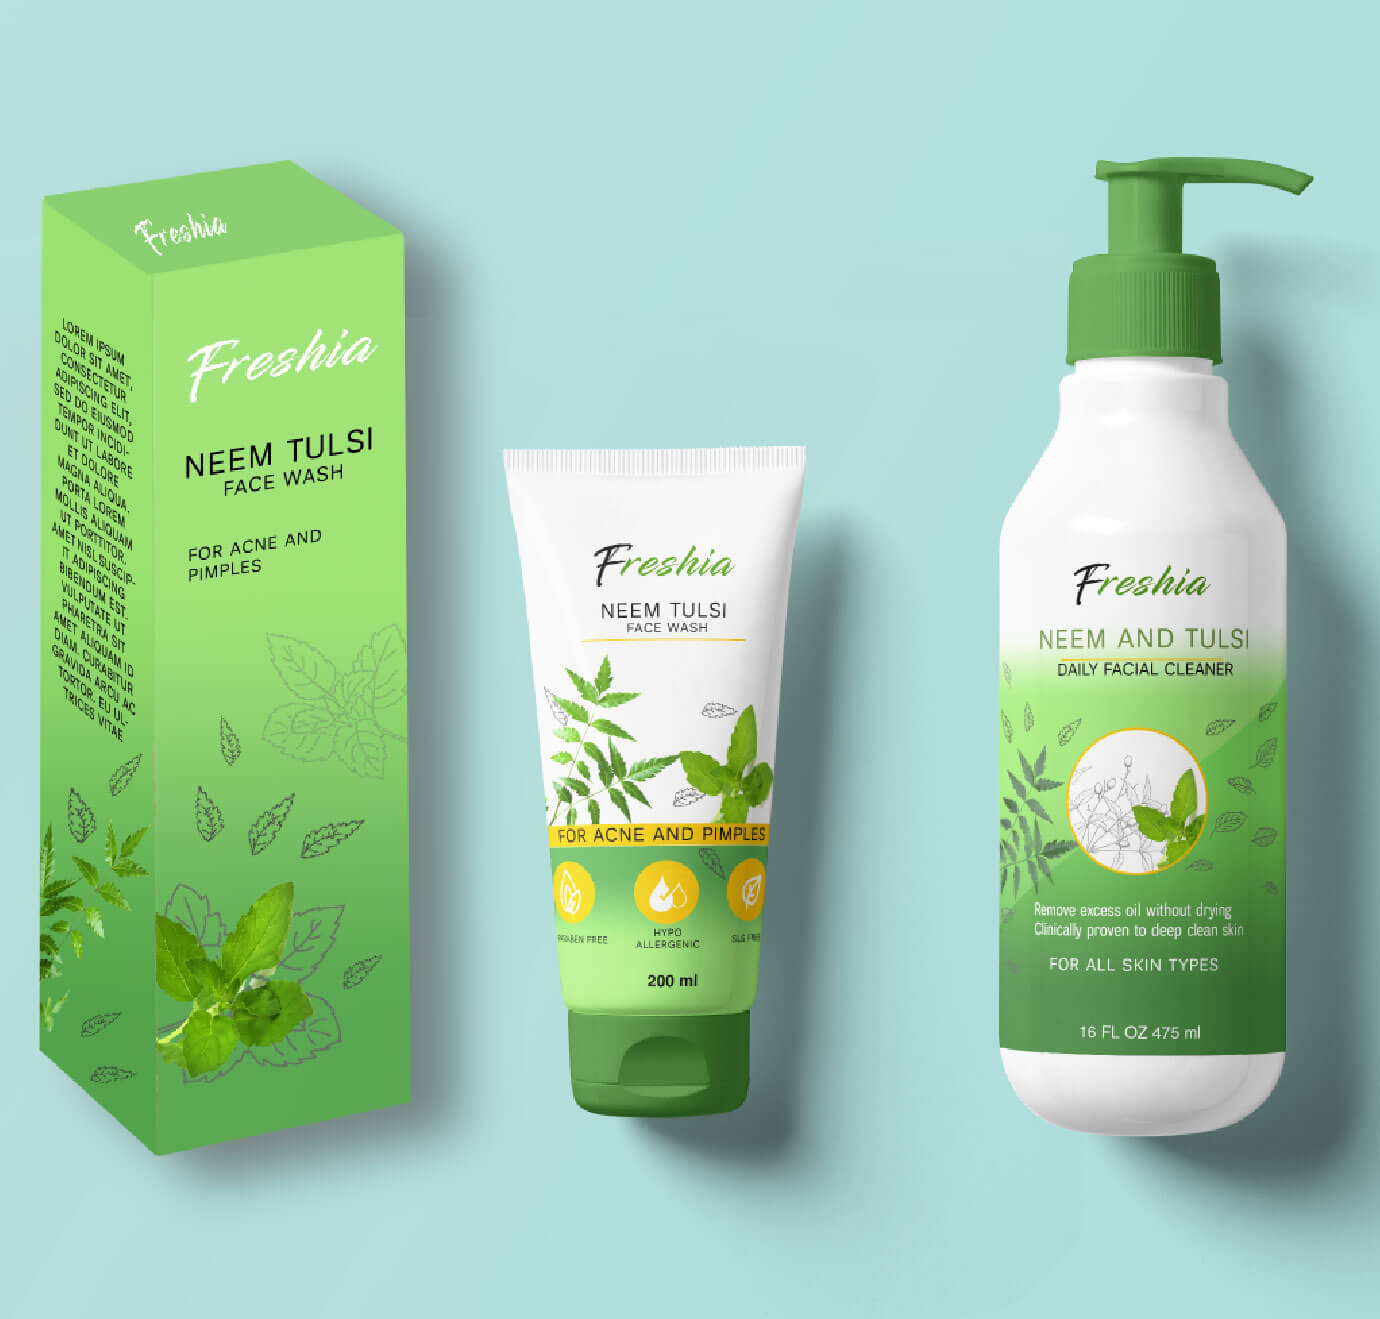 Product packaging design agency Guwahati